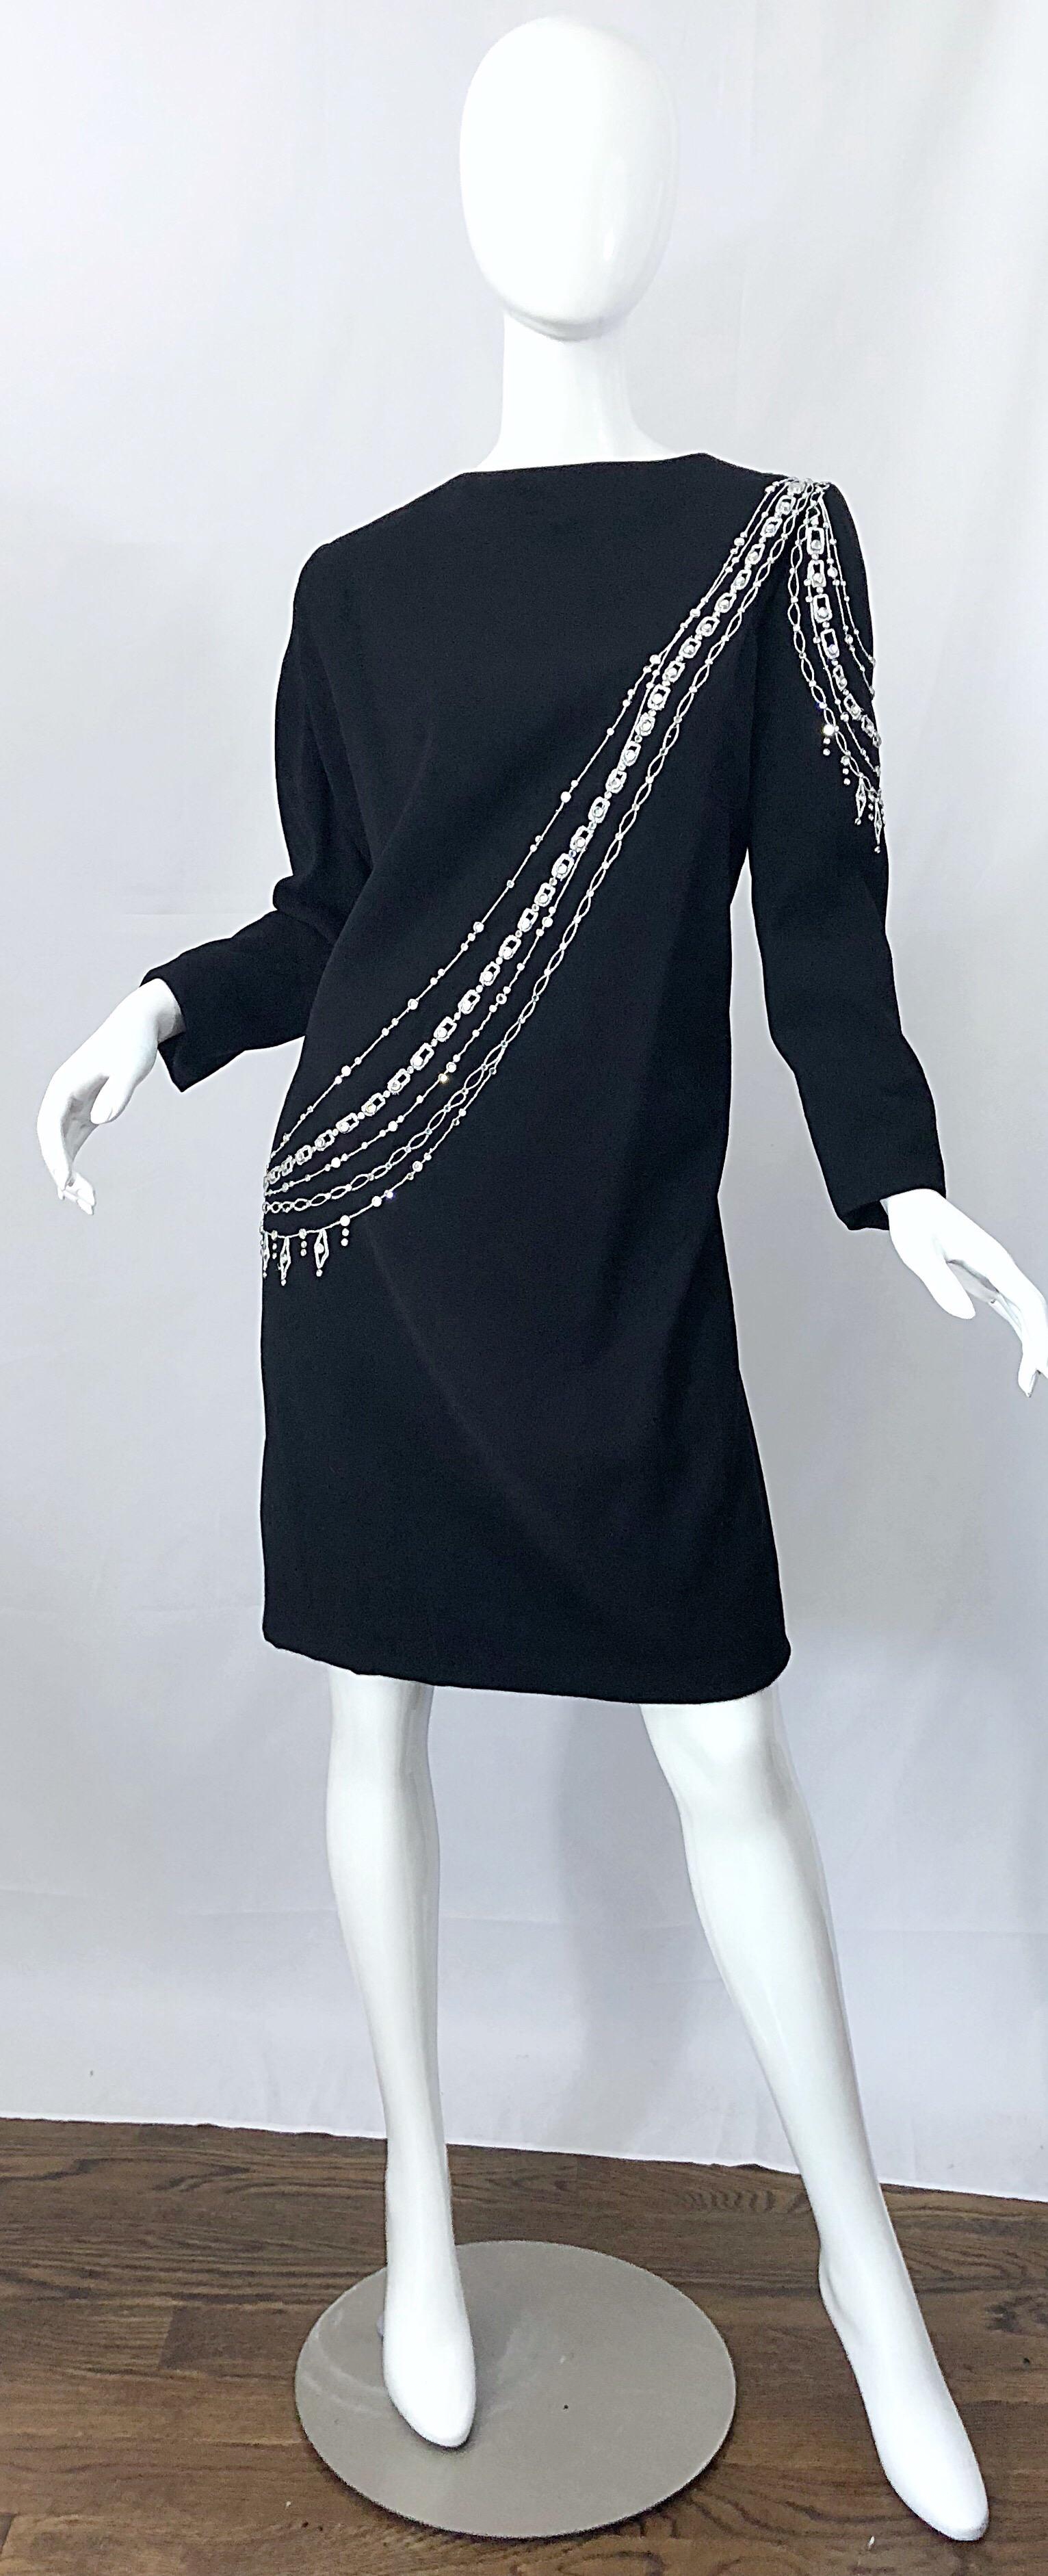 Amazing vintage BOB MACKIE plus size black long sleeve dress! Features hand-sewn rhinestones and beads with silver threading. One pocket at the left side of the hip. Hidden zipper up the back with hook-and-eye closure. Very flattering and forgiving